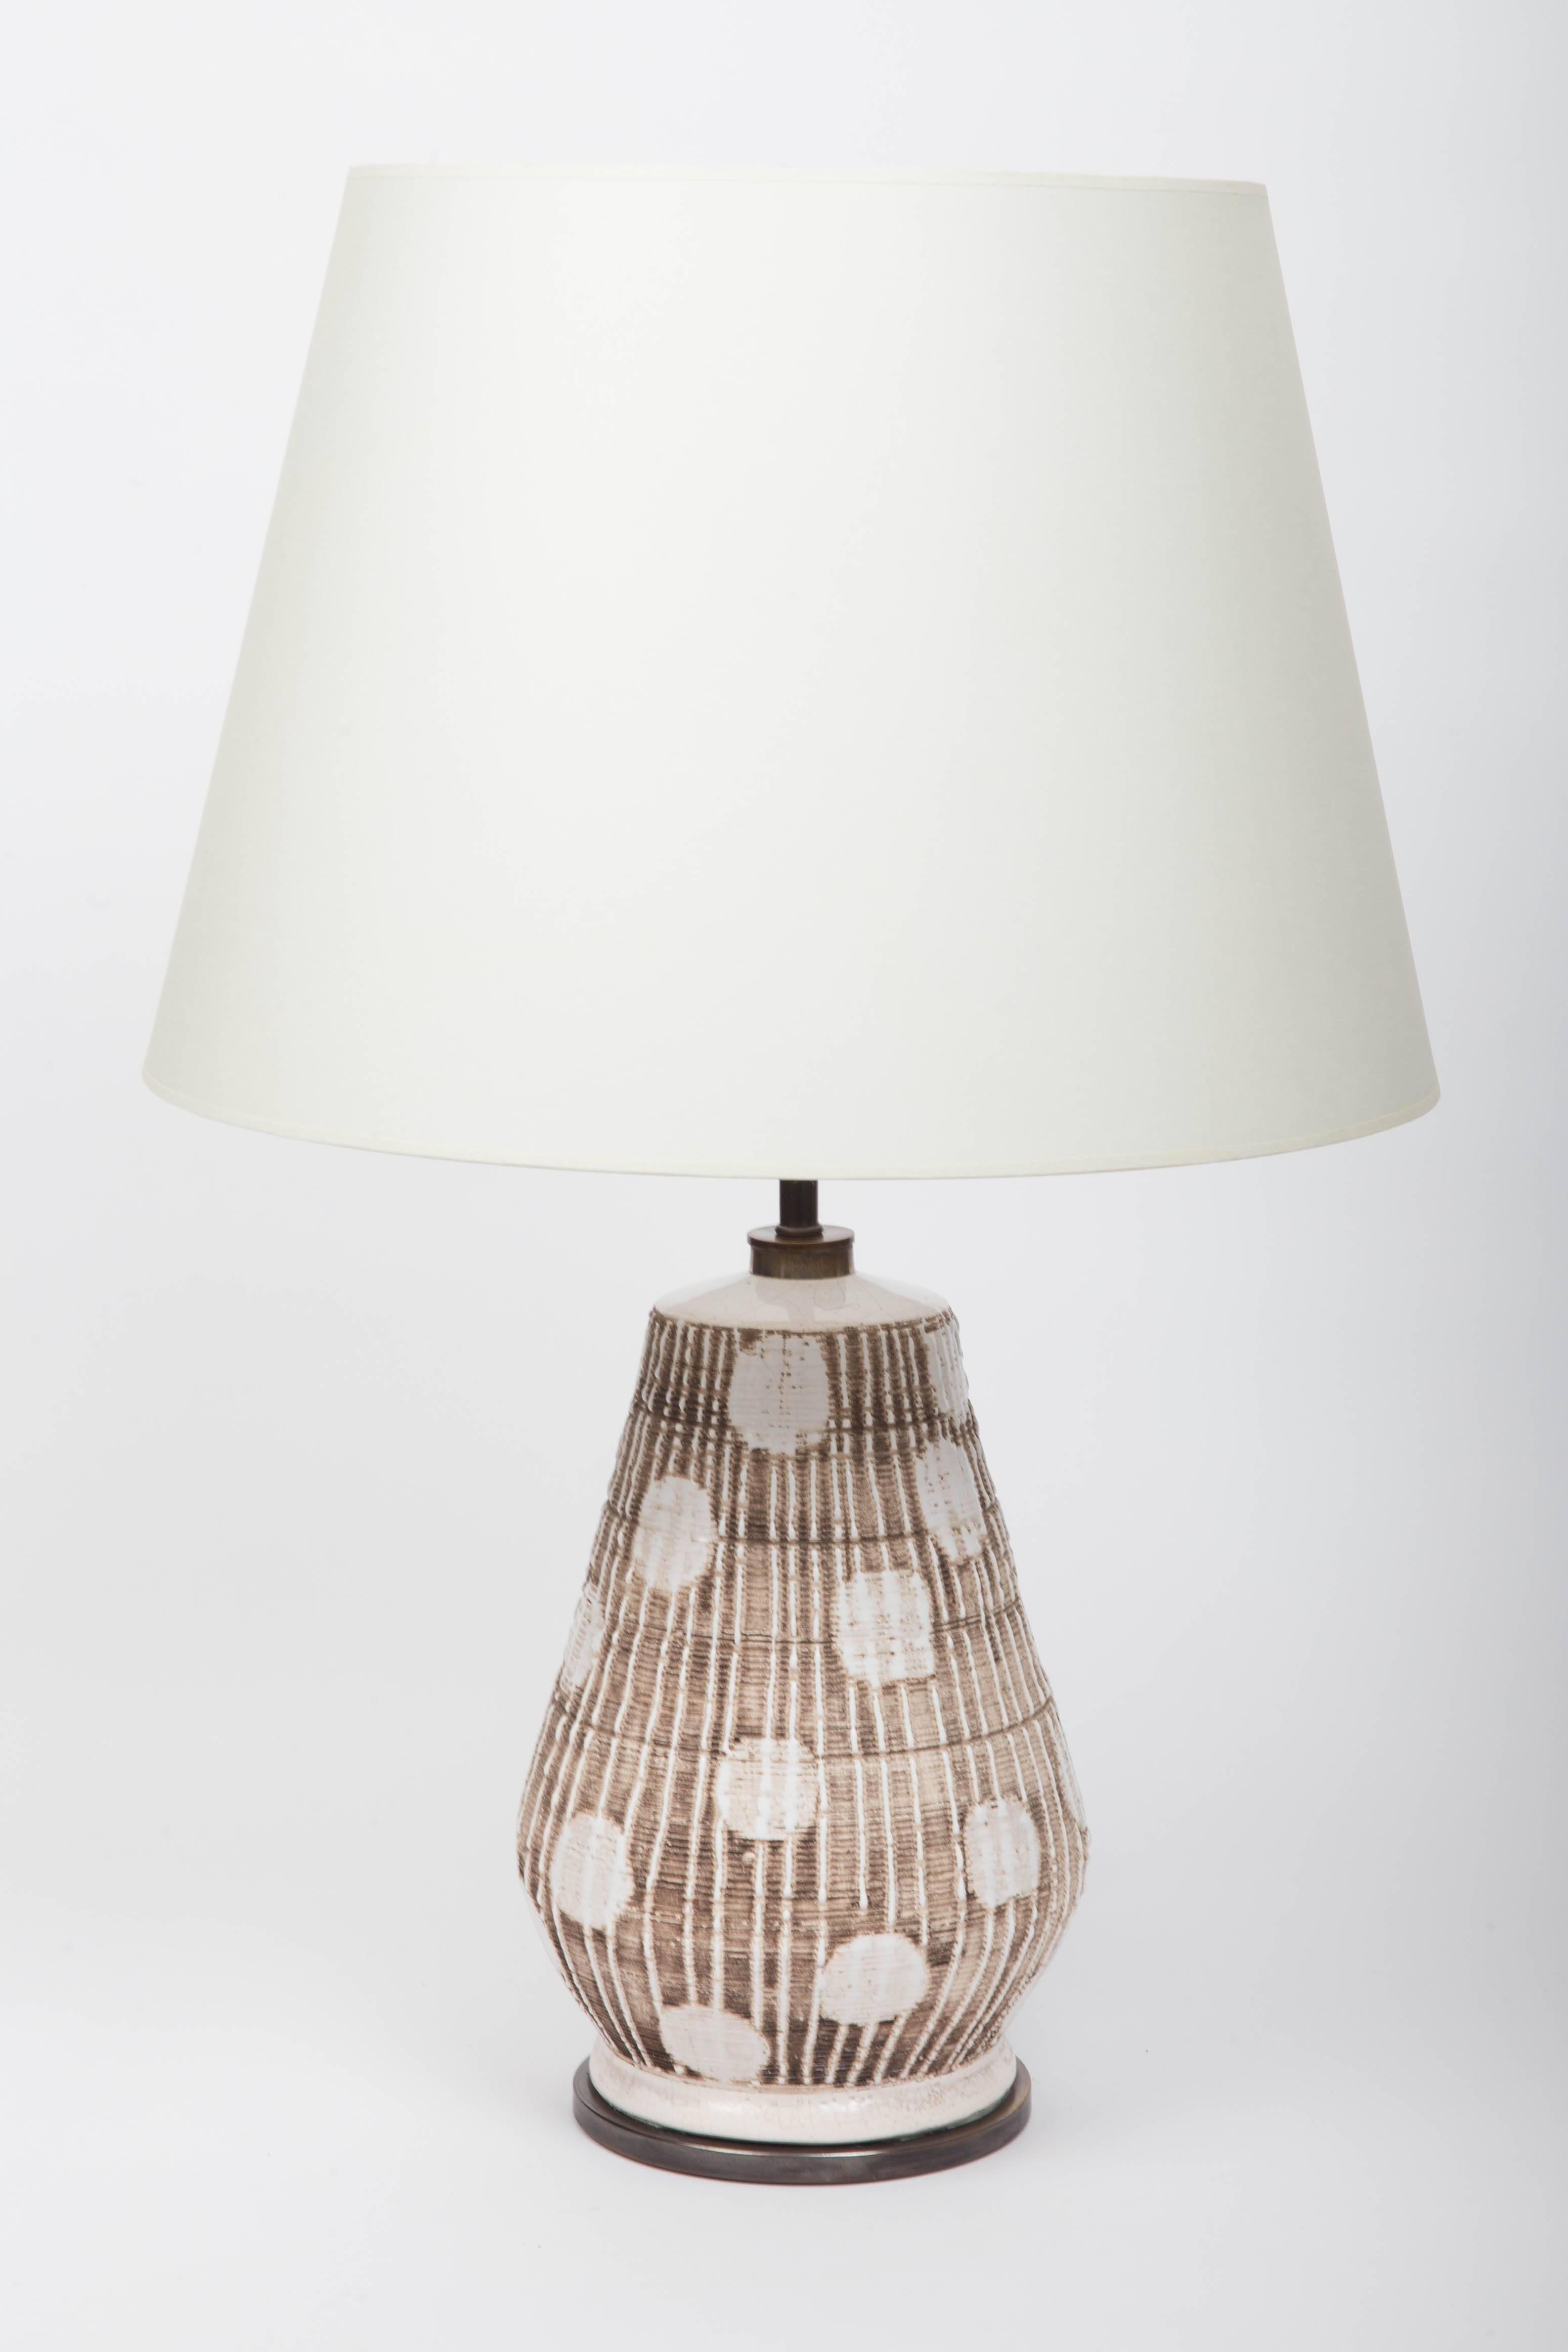 Bronze Ceramic Table Lamp in Brown and White with Graphic Dots